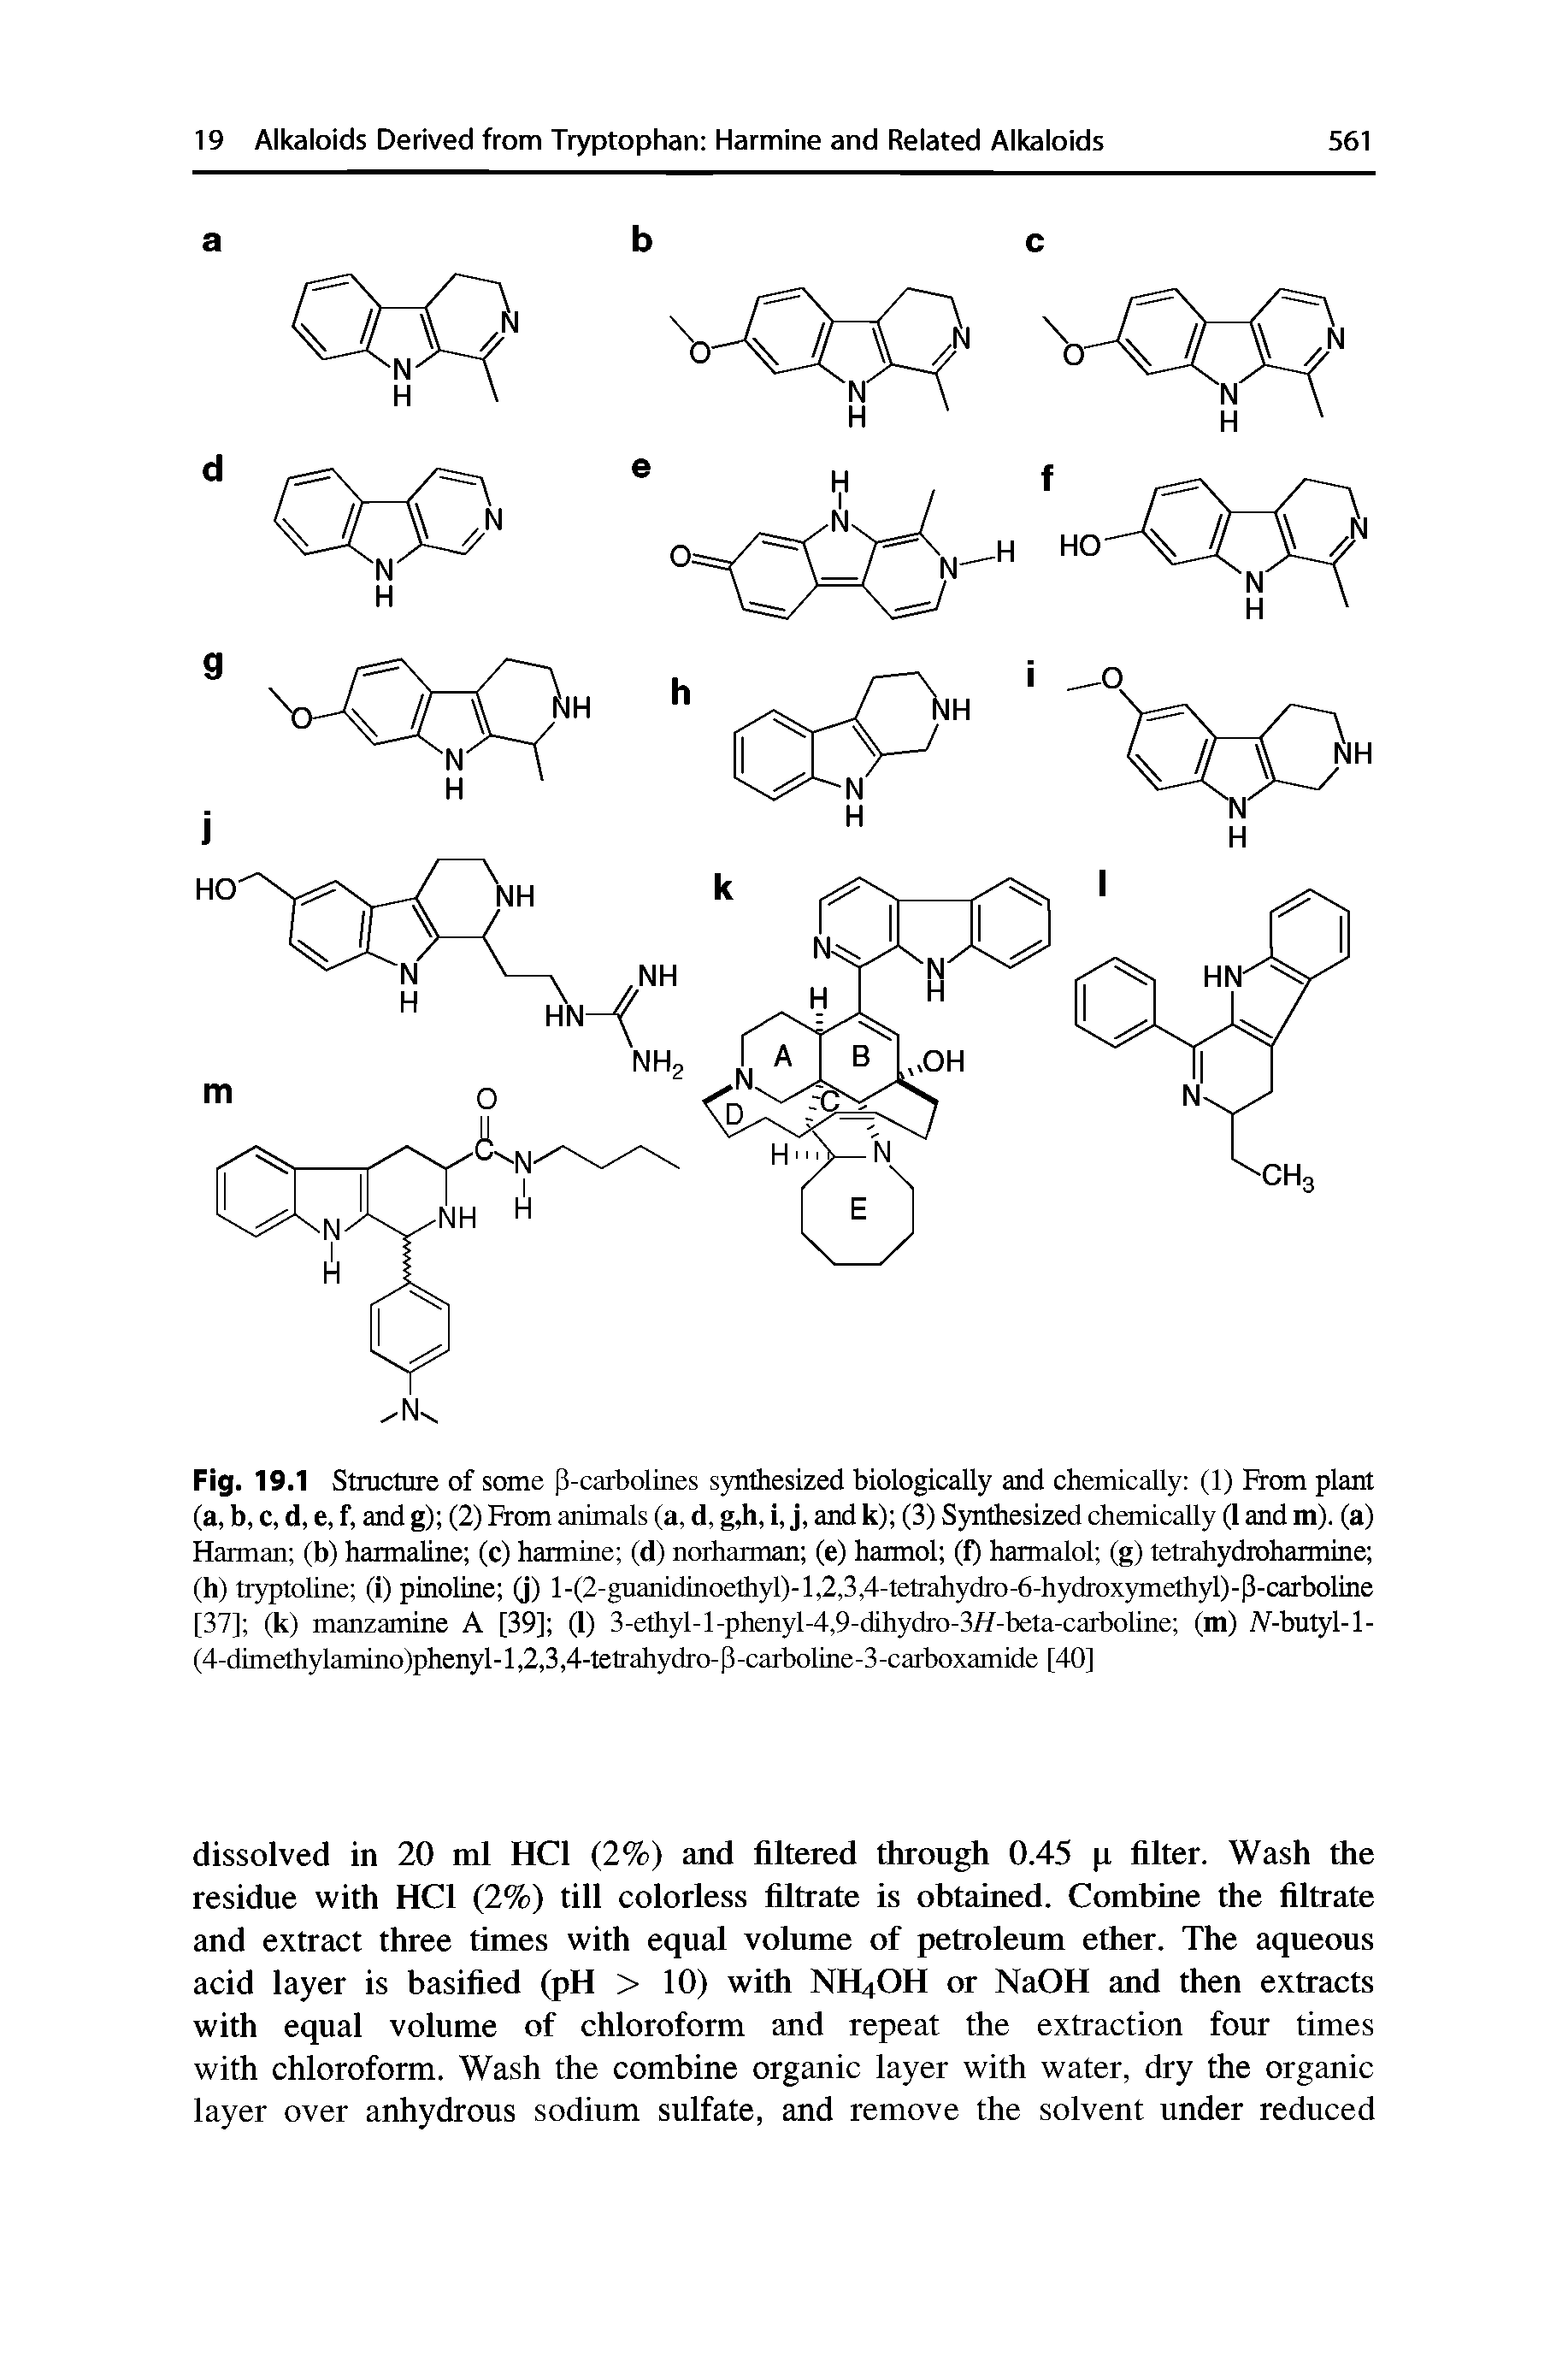 Fig. 19.1 Structure of some P-carbolines synthesized biologically and chemically (1) Prom plant (a, b, c, d, e, f, and g) (2) Prom animals (a, d, g,h, i, j, and k) (3) Synthesized chanically (1 and m). (a) Harman (b) harmaline (c) harmine (d) norharman (e) hatmol (f) harmalol (g) tetrahydrohatmine (h) tryptoline (i) pinoline (j) l-(2-guanidinoethyl)-l,2,3,4-tetrahydro-6-hydroxymethyl)-P-carboline [37] (k) manzamine A [39] (1) 3-ethyl-l-phenyM,9-dihydro-3//-beta-carbolme (m) lV-butyl-1-(4-dimethylammo)phenyl-l,2,3,4-tetrahydro-P-carboline-3-carboxamide [40]...